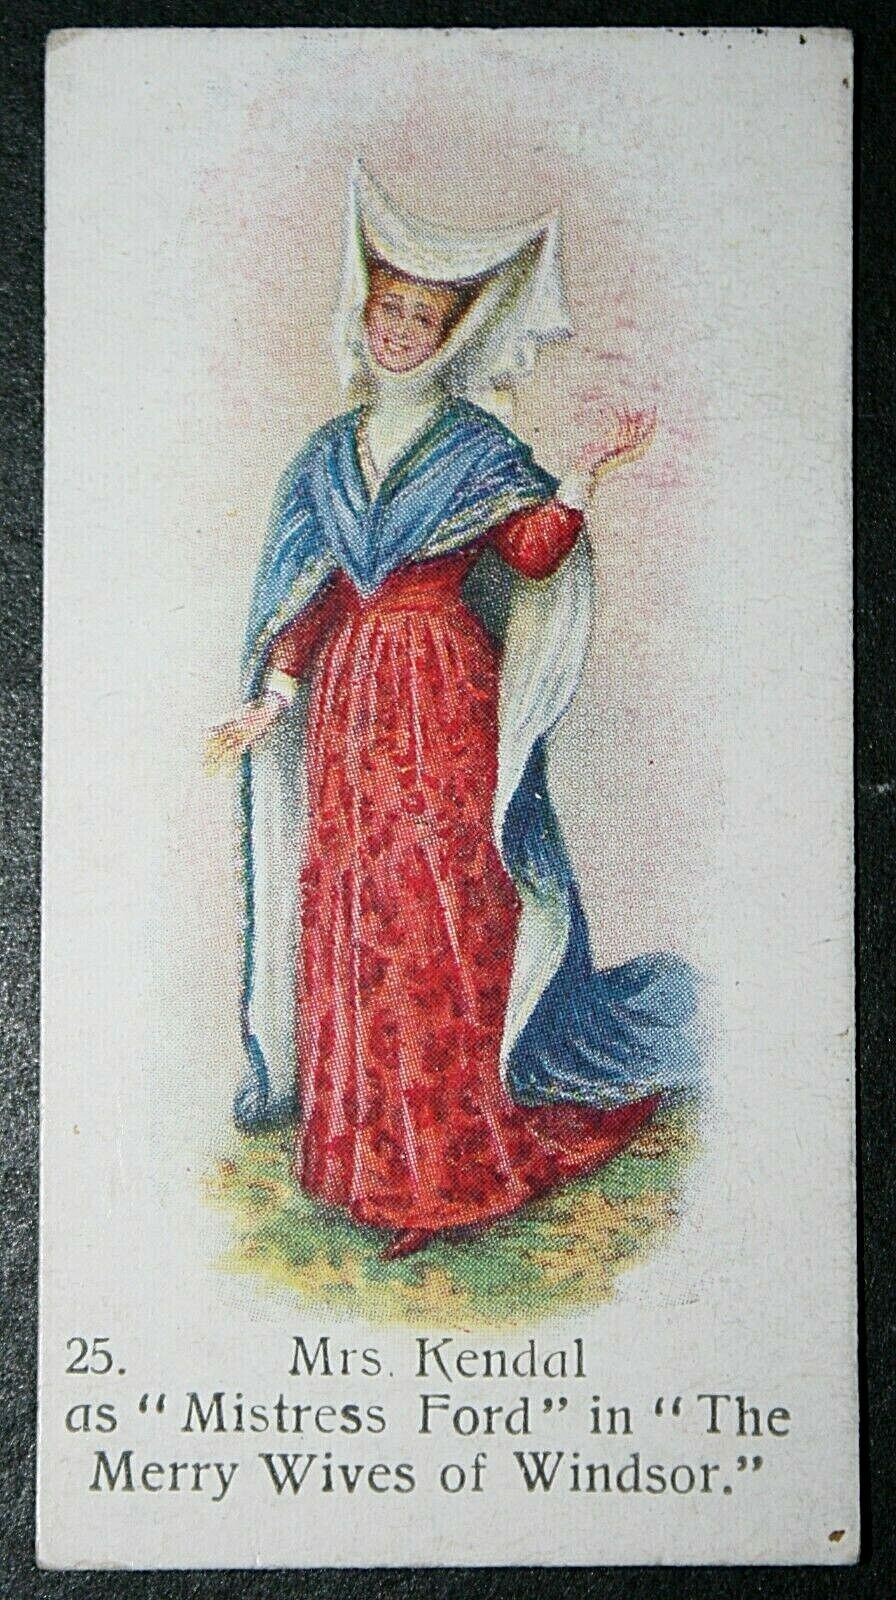 MERRY WIVES OF WINDSOR   Shakespeare   Mistress Ford  Vintage Card   BD01